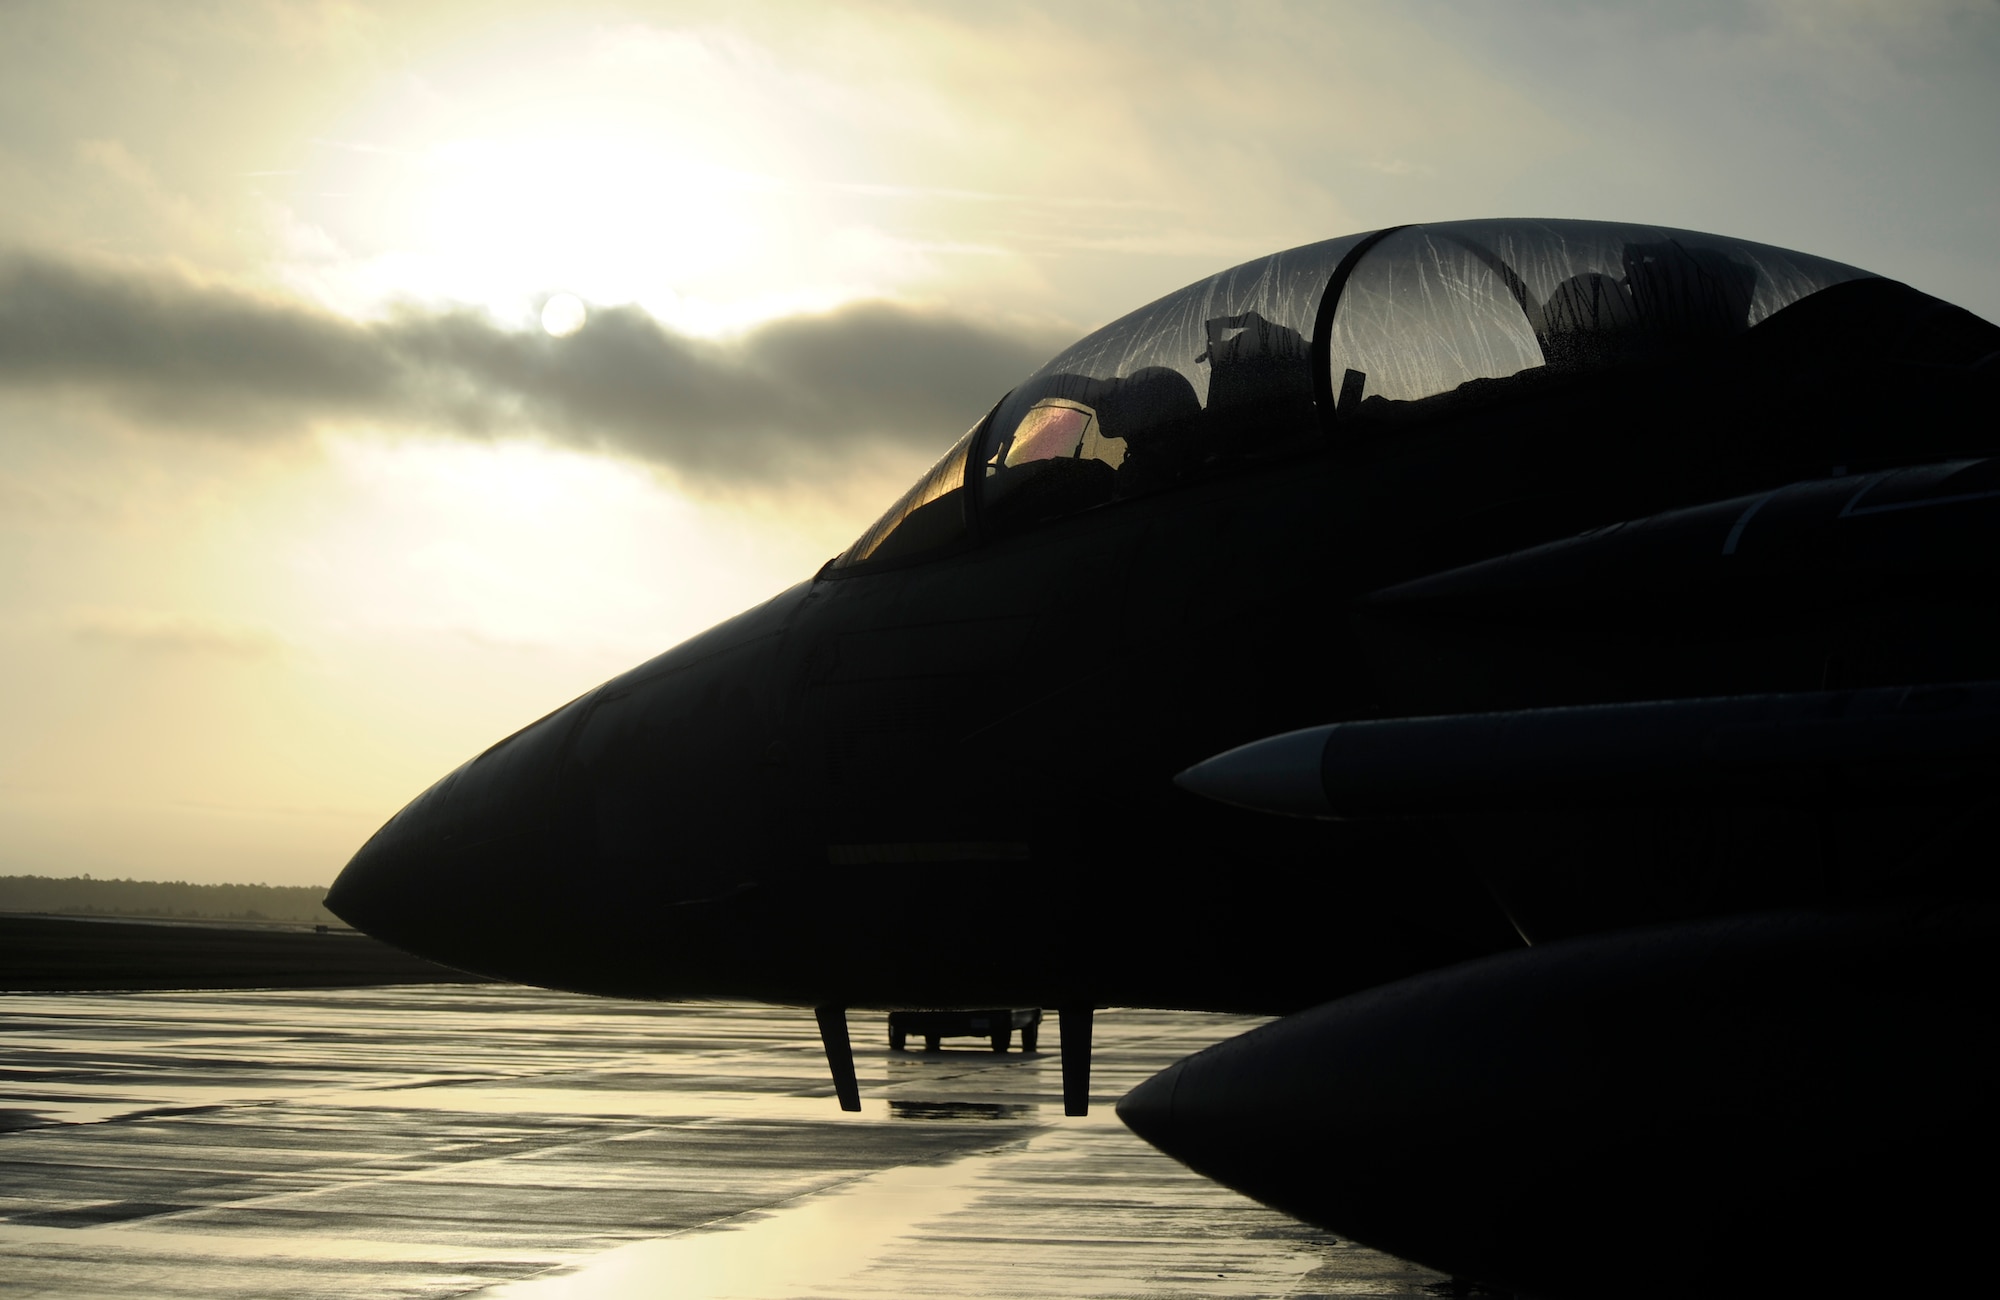 U.S. Air Force F-15 Strike Eagle pilots from the 336th Fighter Squadron, Mountain Home Air Force Base, Idaho, perform final operations checks on their aircraft prior to take-off at Tyndall Air Force Base, Fla., Dec. 5, 2016. The 336th FS and other Air Force units deployed to Tyndall AFB to participate in Checkered Flag 17-1, a large-scale aerial total force integration exercise. (U.S. Air Force photo by Senior Airman Solomon Cook/Released)